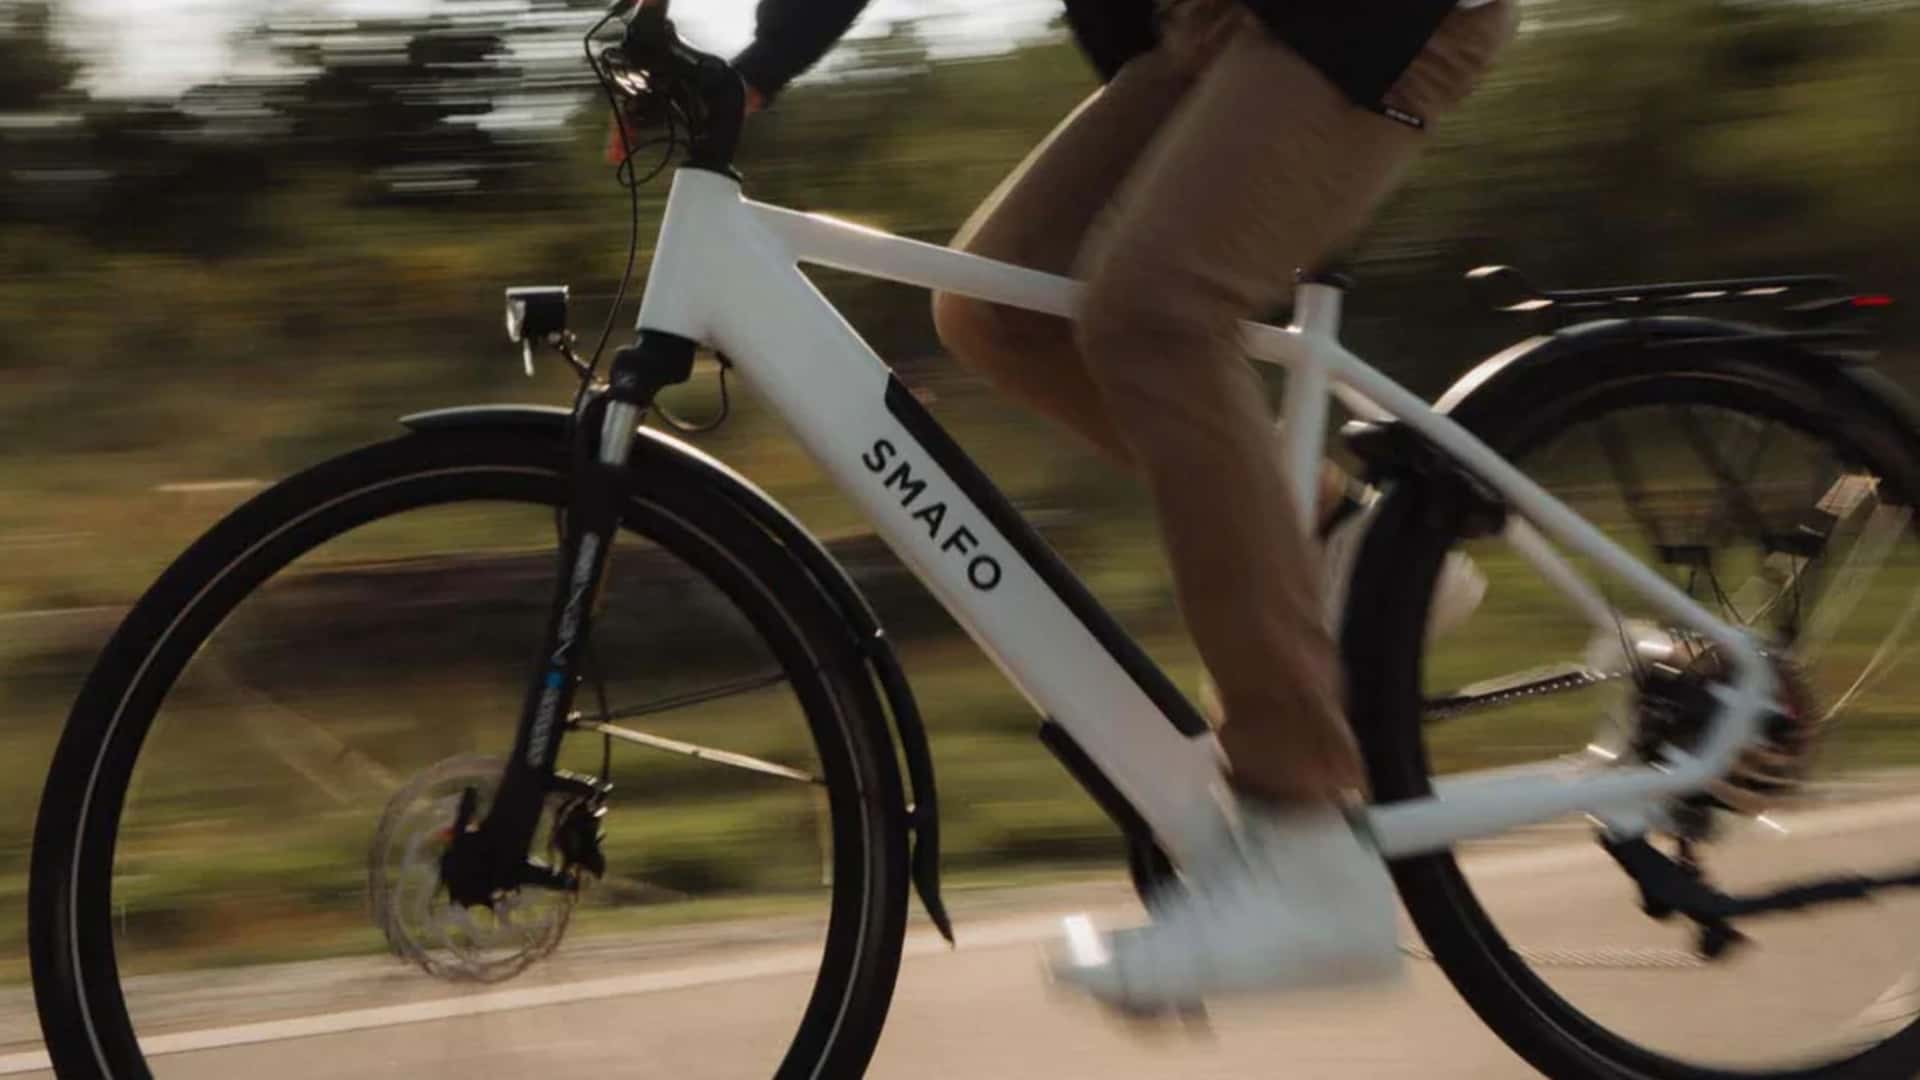 new smafo 4 electric bike is ready to conquer the urban jungle